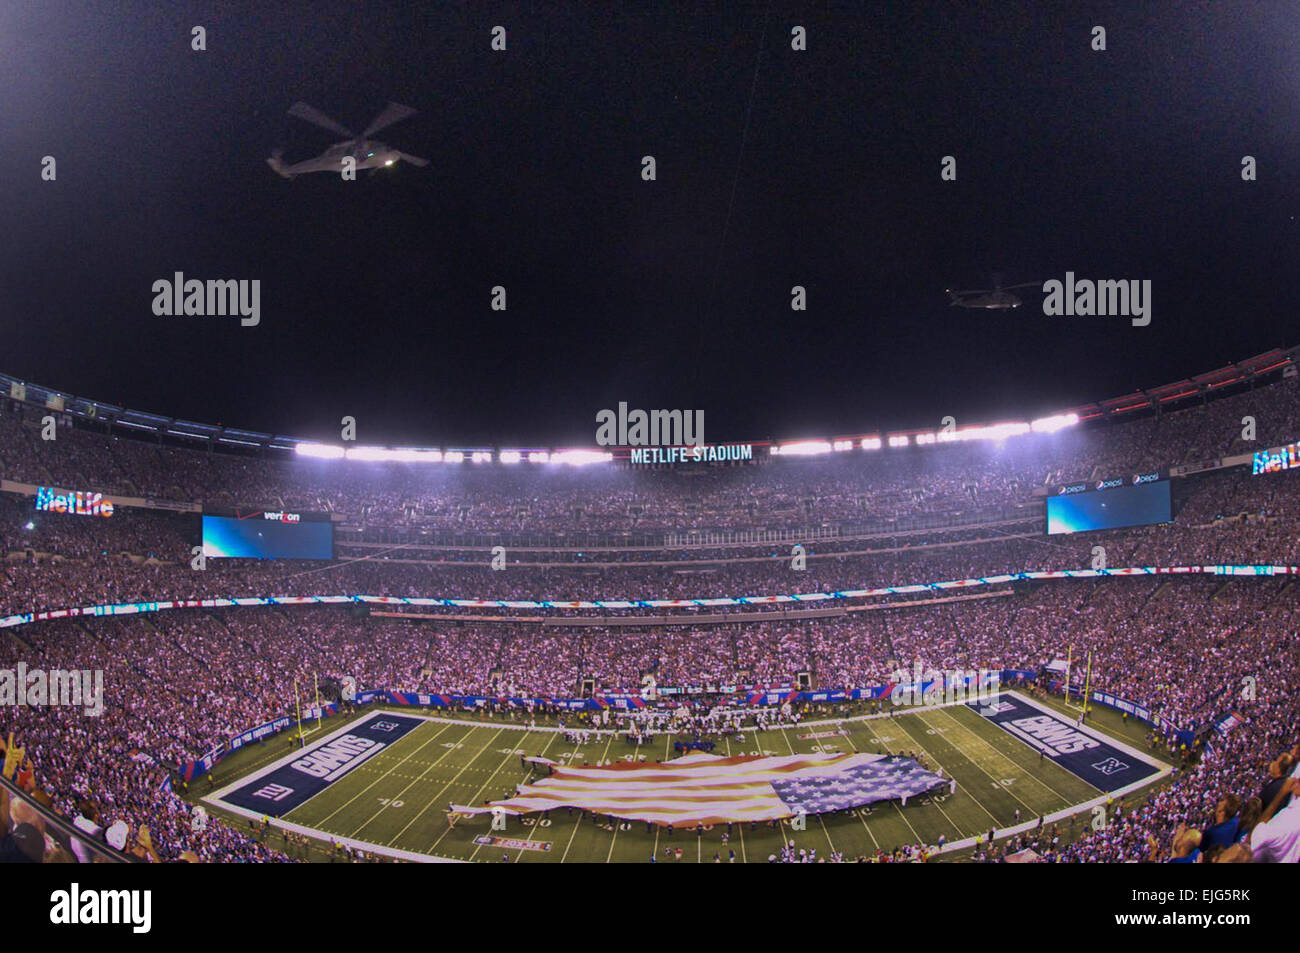 EAST RUTHERFORD, N.J. - Blackhawk helicopters from the New Jersey Air National Guard perform a flyover while Soldiers, Marines, sailors, Coast Guardsmen,  and airmen display a U.S.-shaped American flag across the field during  pre-game ceremonies for the NFL's season opening game between the New York Giants and Dallas Cowboys at MetLife Stadium, Sept. 5. More than 60 service members presented the large flag as Queen Latifah sang the national anthem. US Army  John Manley Stock Photo